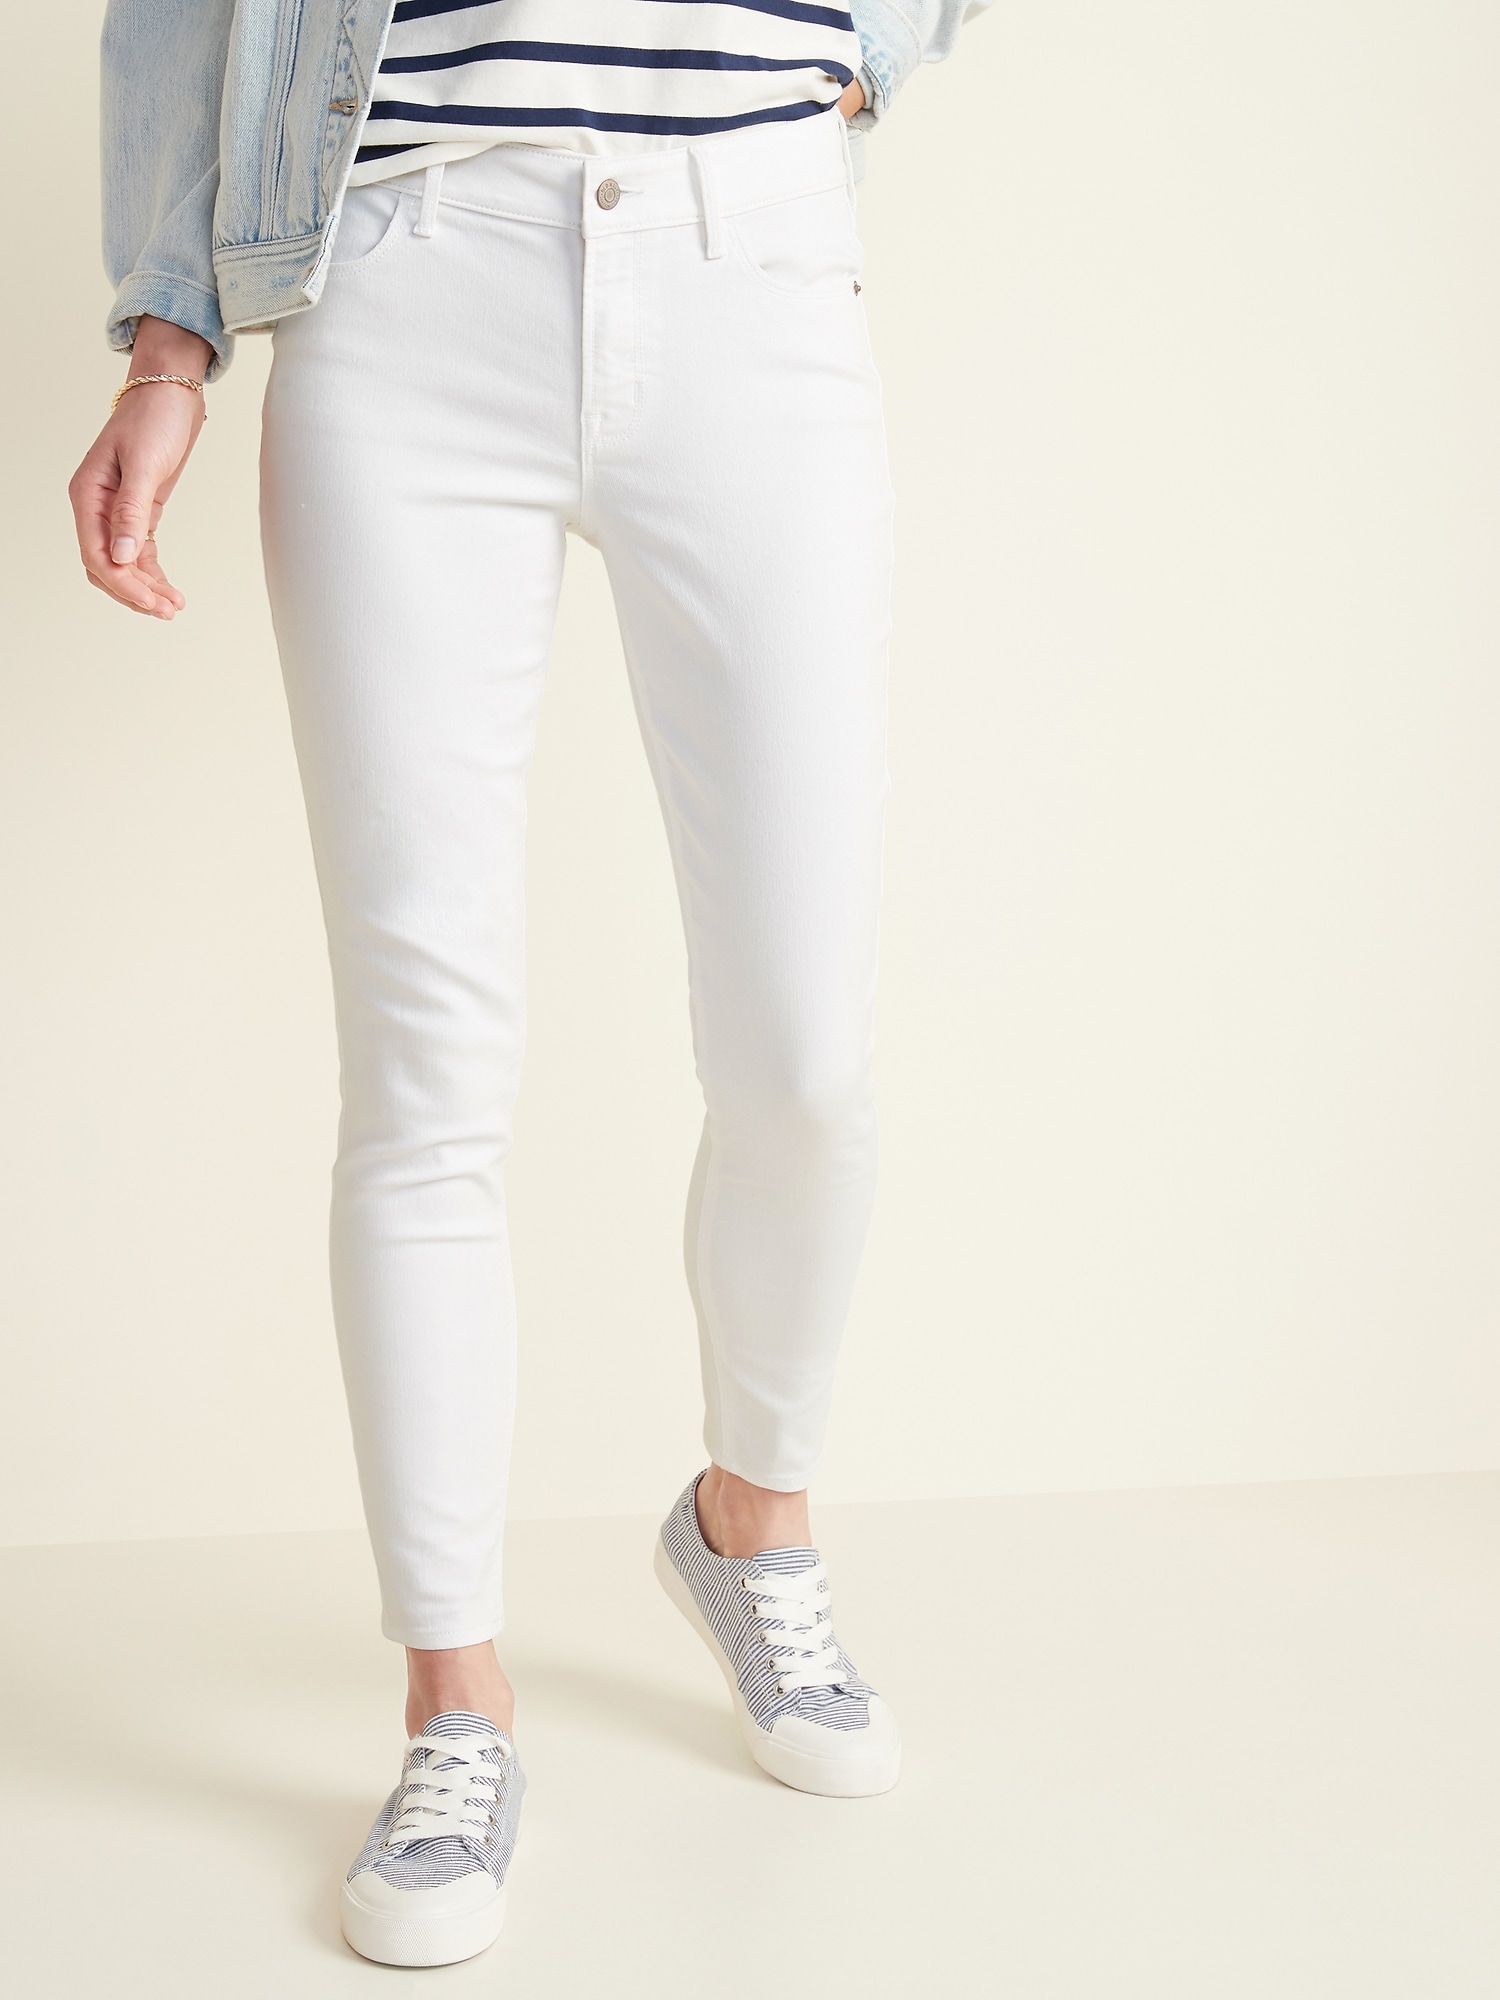 white and denim jeans